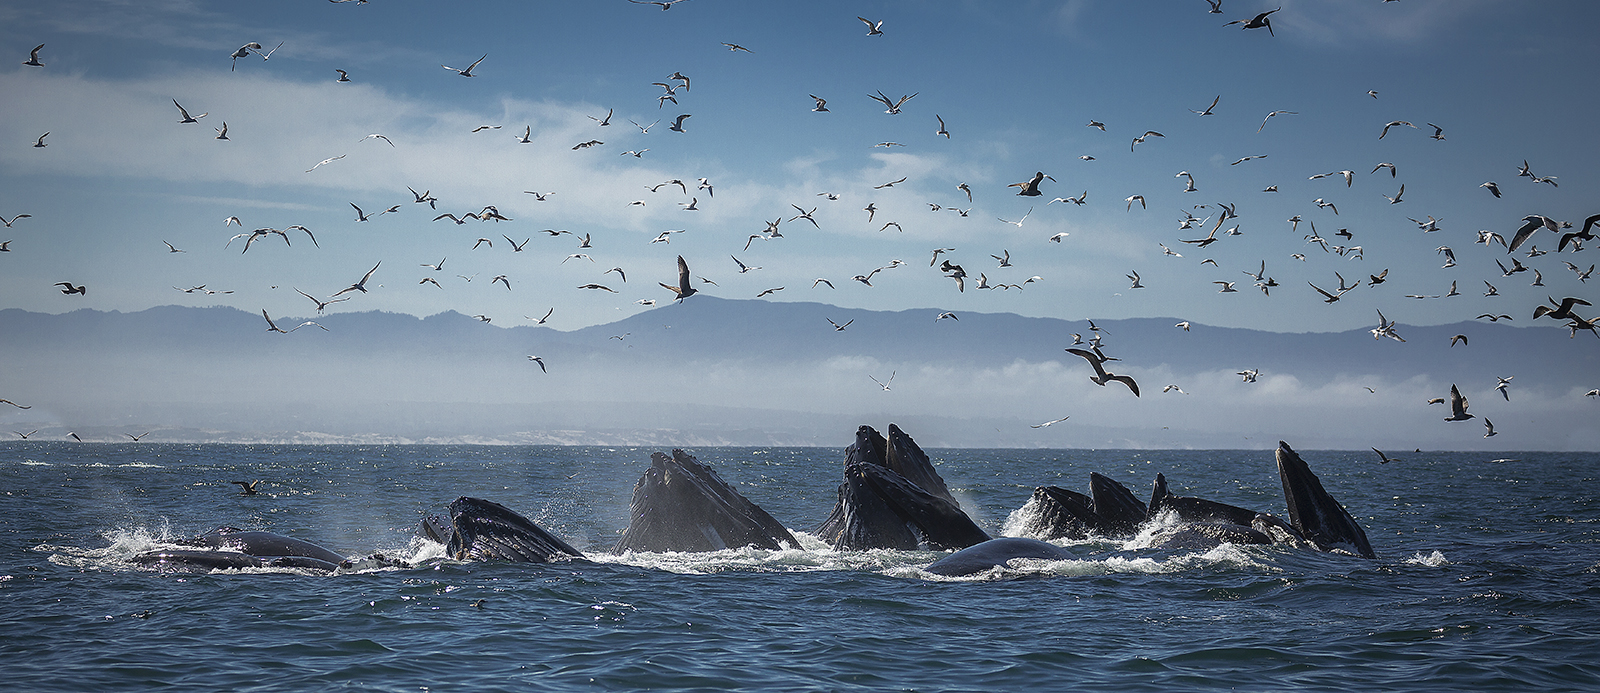 The Best Places for Whale Watching in Northern California Select Registry